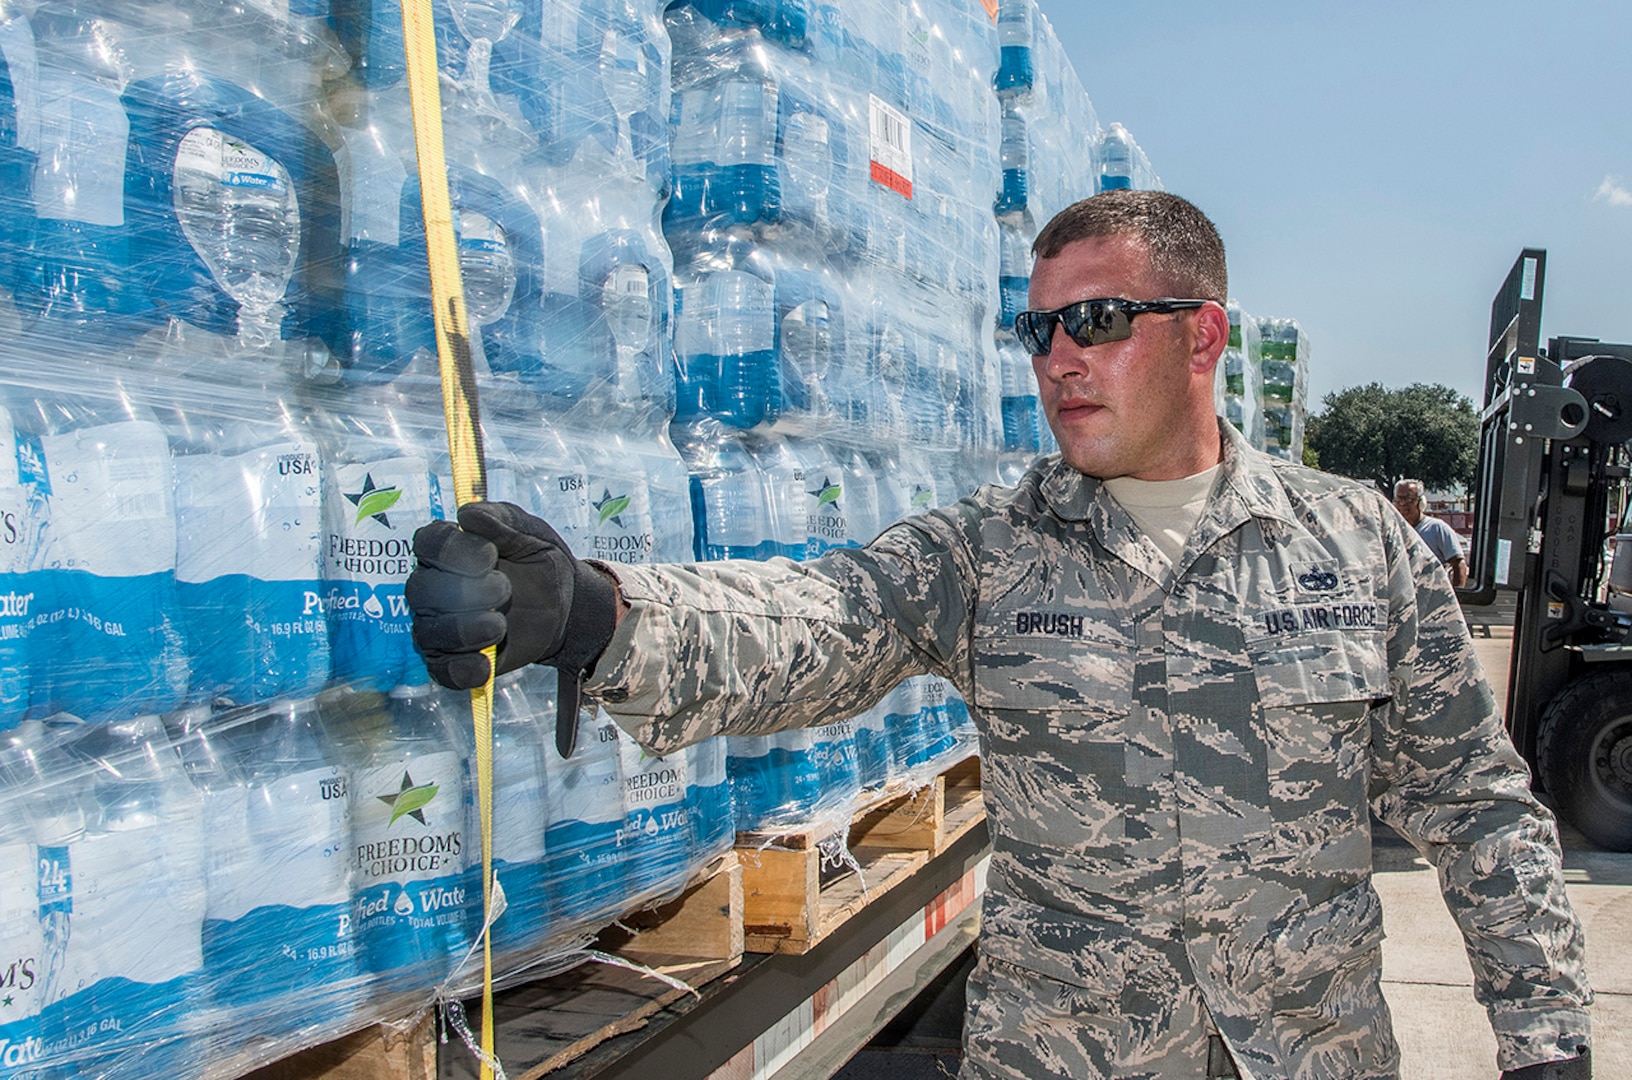 Air Force Staff Sgt. James Brush, 502nd Logistics Readiness Squadron, prepares over 30,000 water bottles for transport at Joint Base San Antonio-Lackland, Texas, as part of Hurricane Harvey relief. DLA Troop Support provided 1.5 million bottles of water and 18 million meals to FEMA in support of the relief efforts.